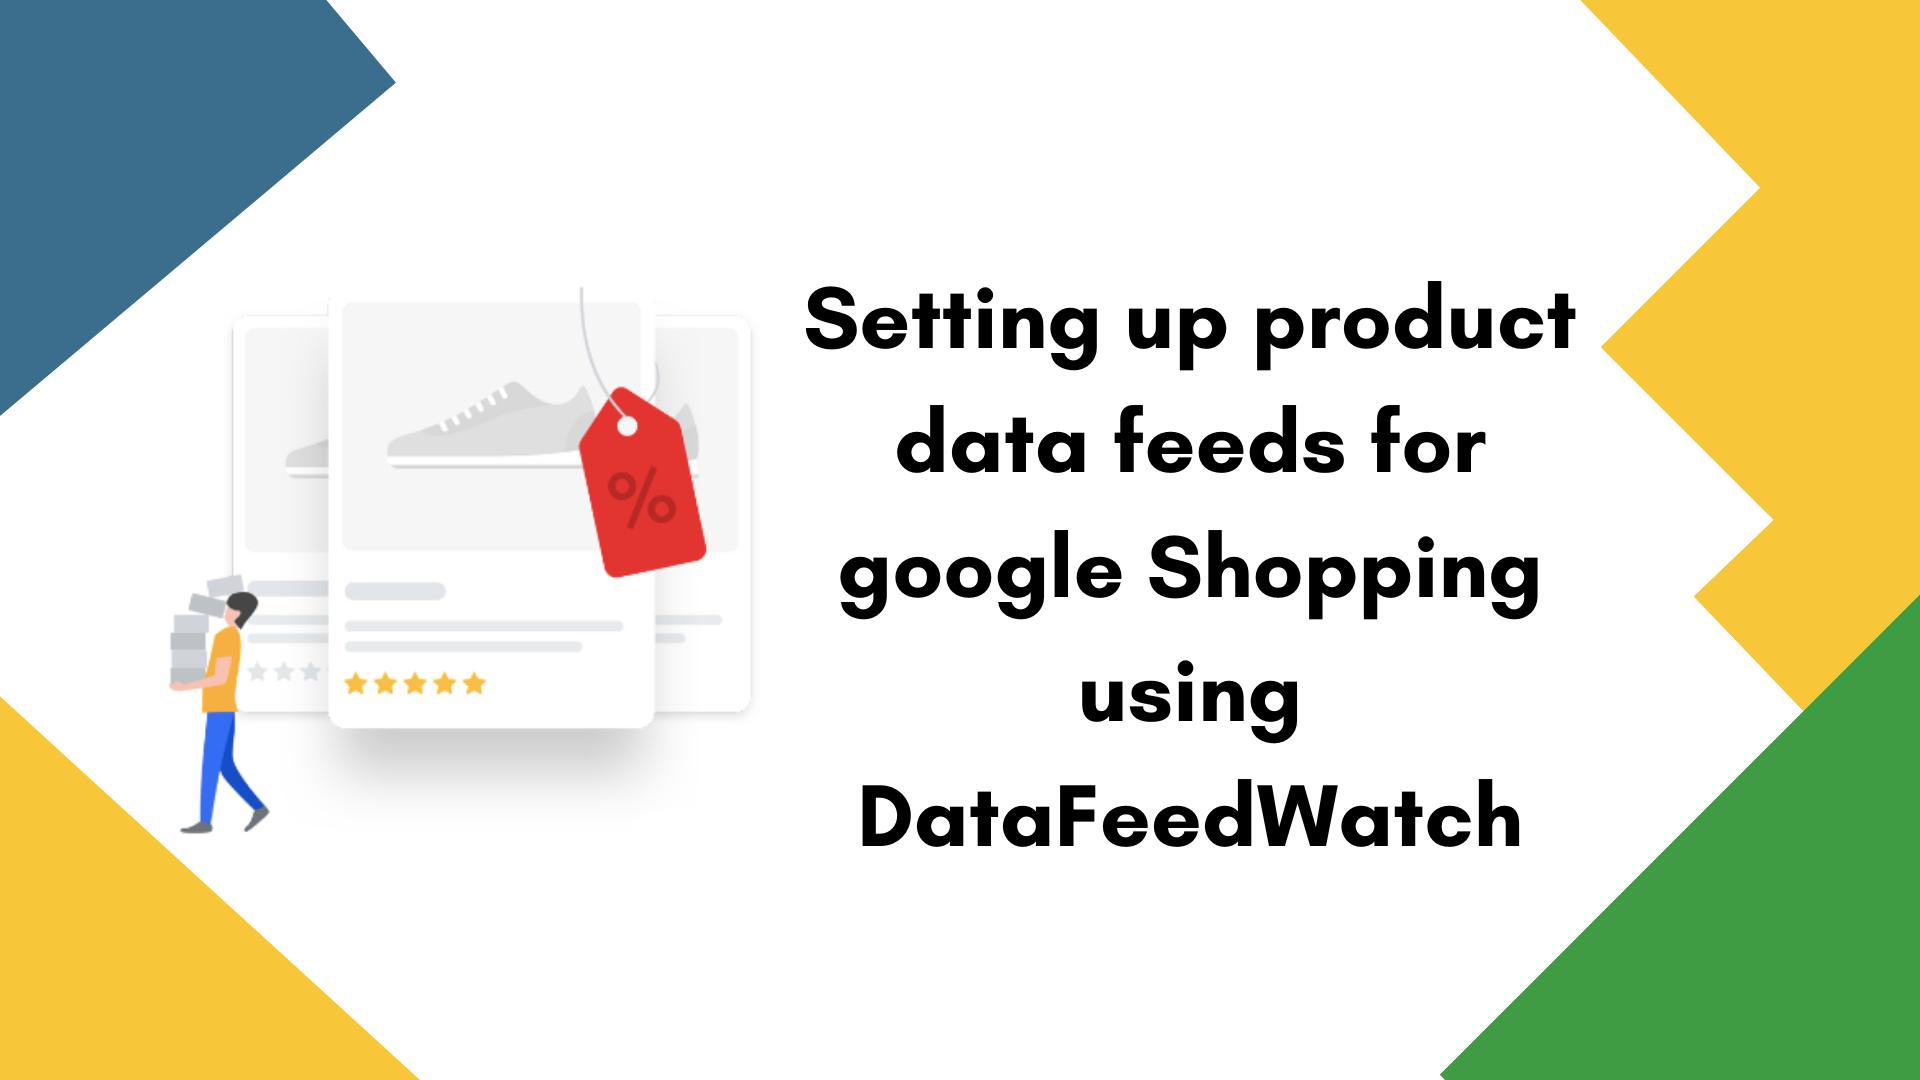 Setting up product data feeds for Google Shopping using DataFeedWatch